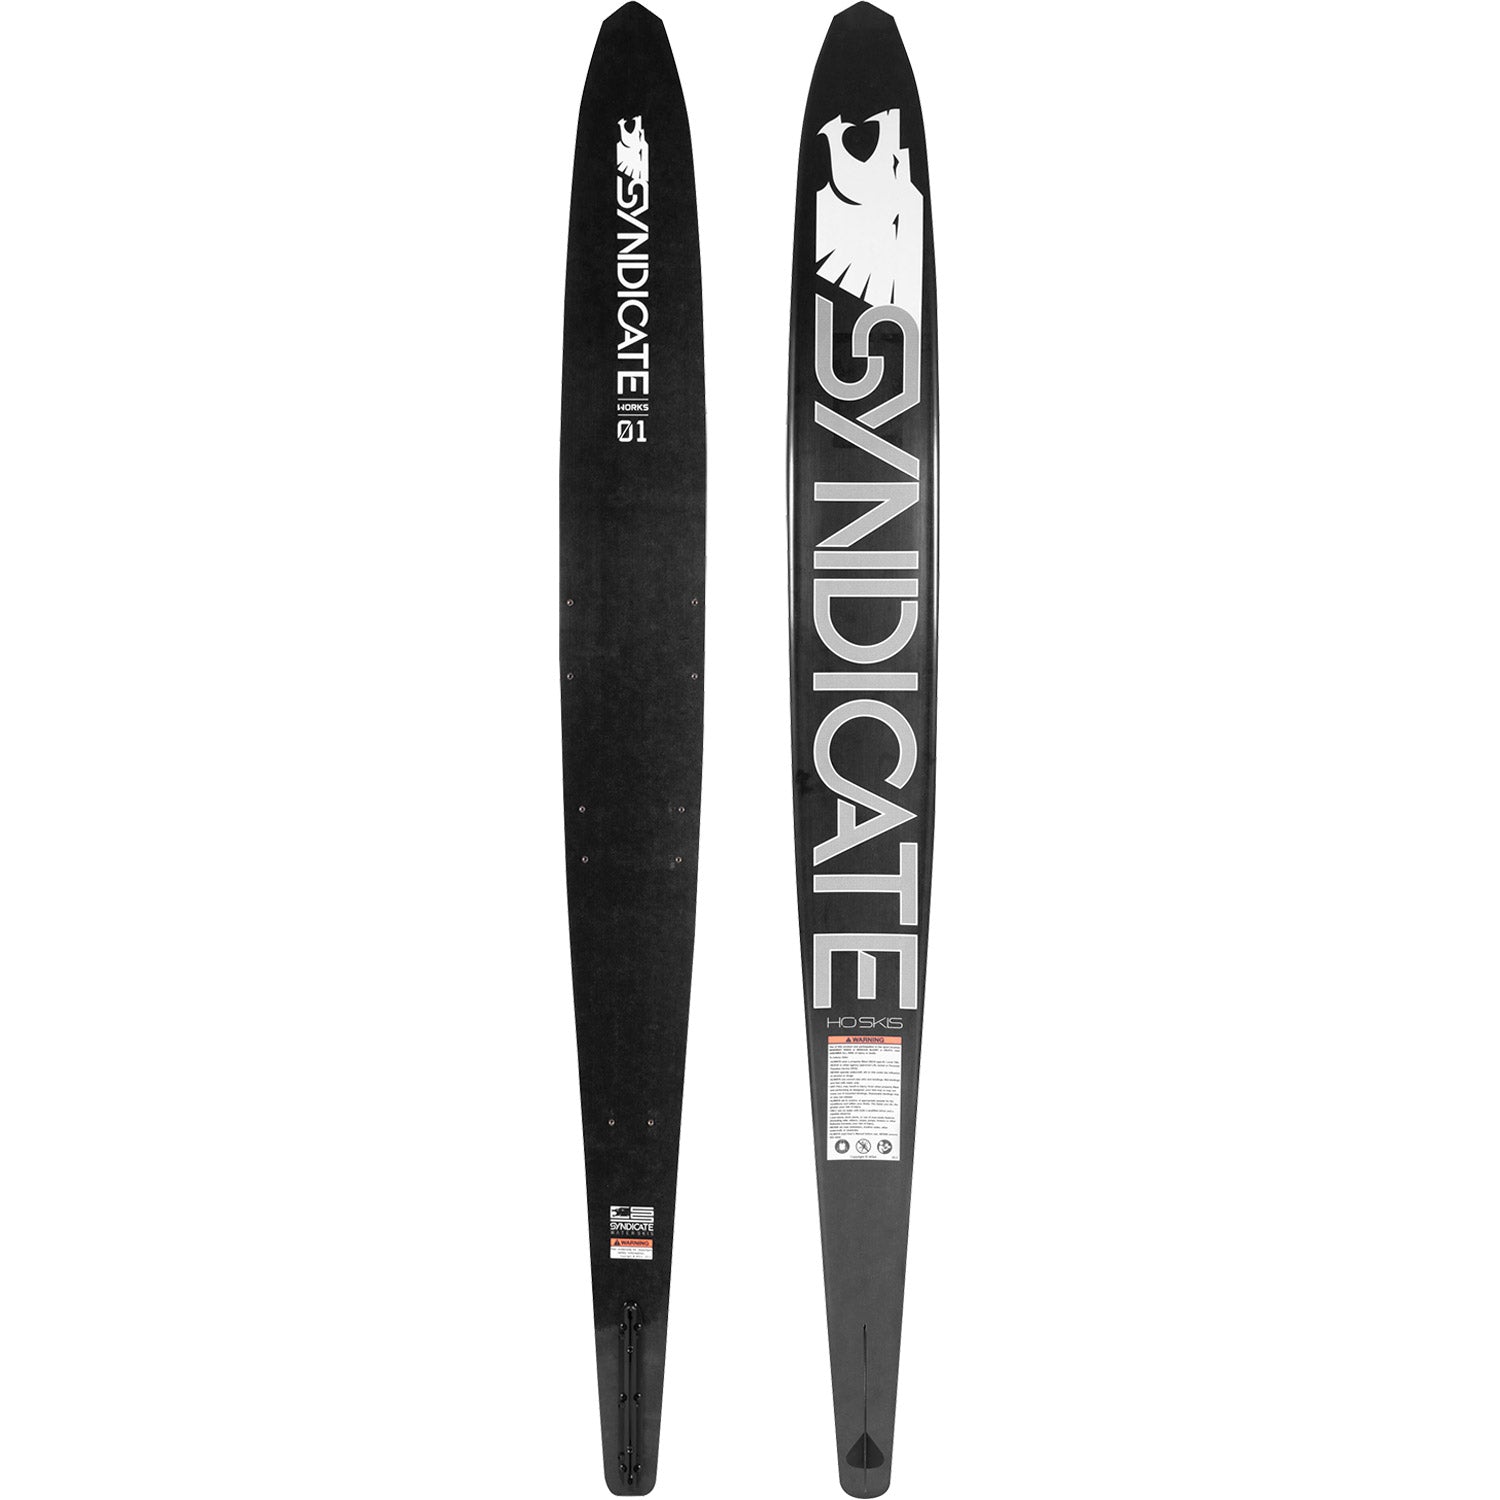 Syndicate Works 01 Slalom Ski w/ Stance 130 Atop Boot Package